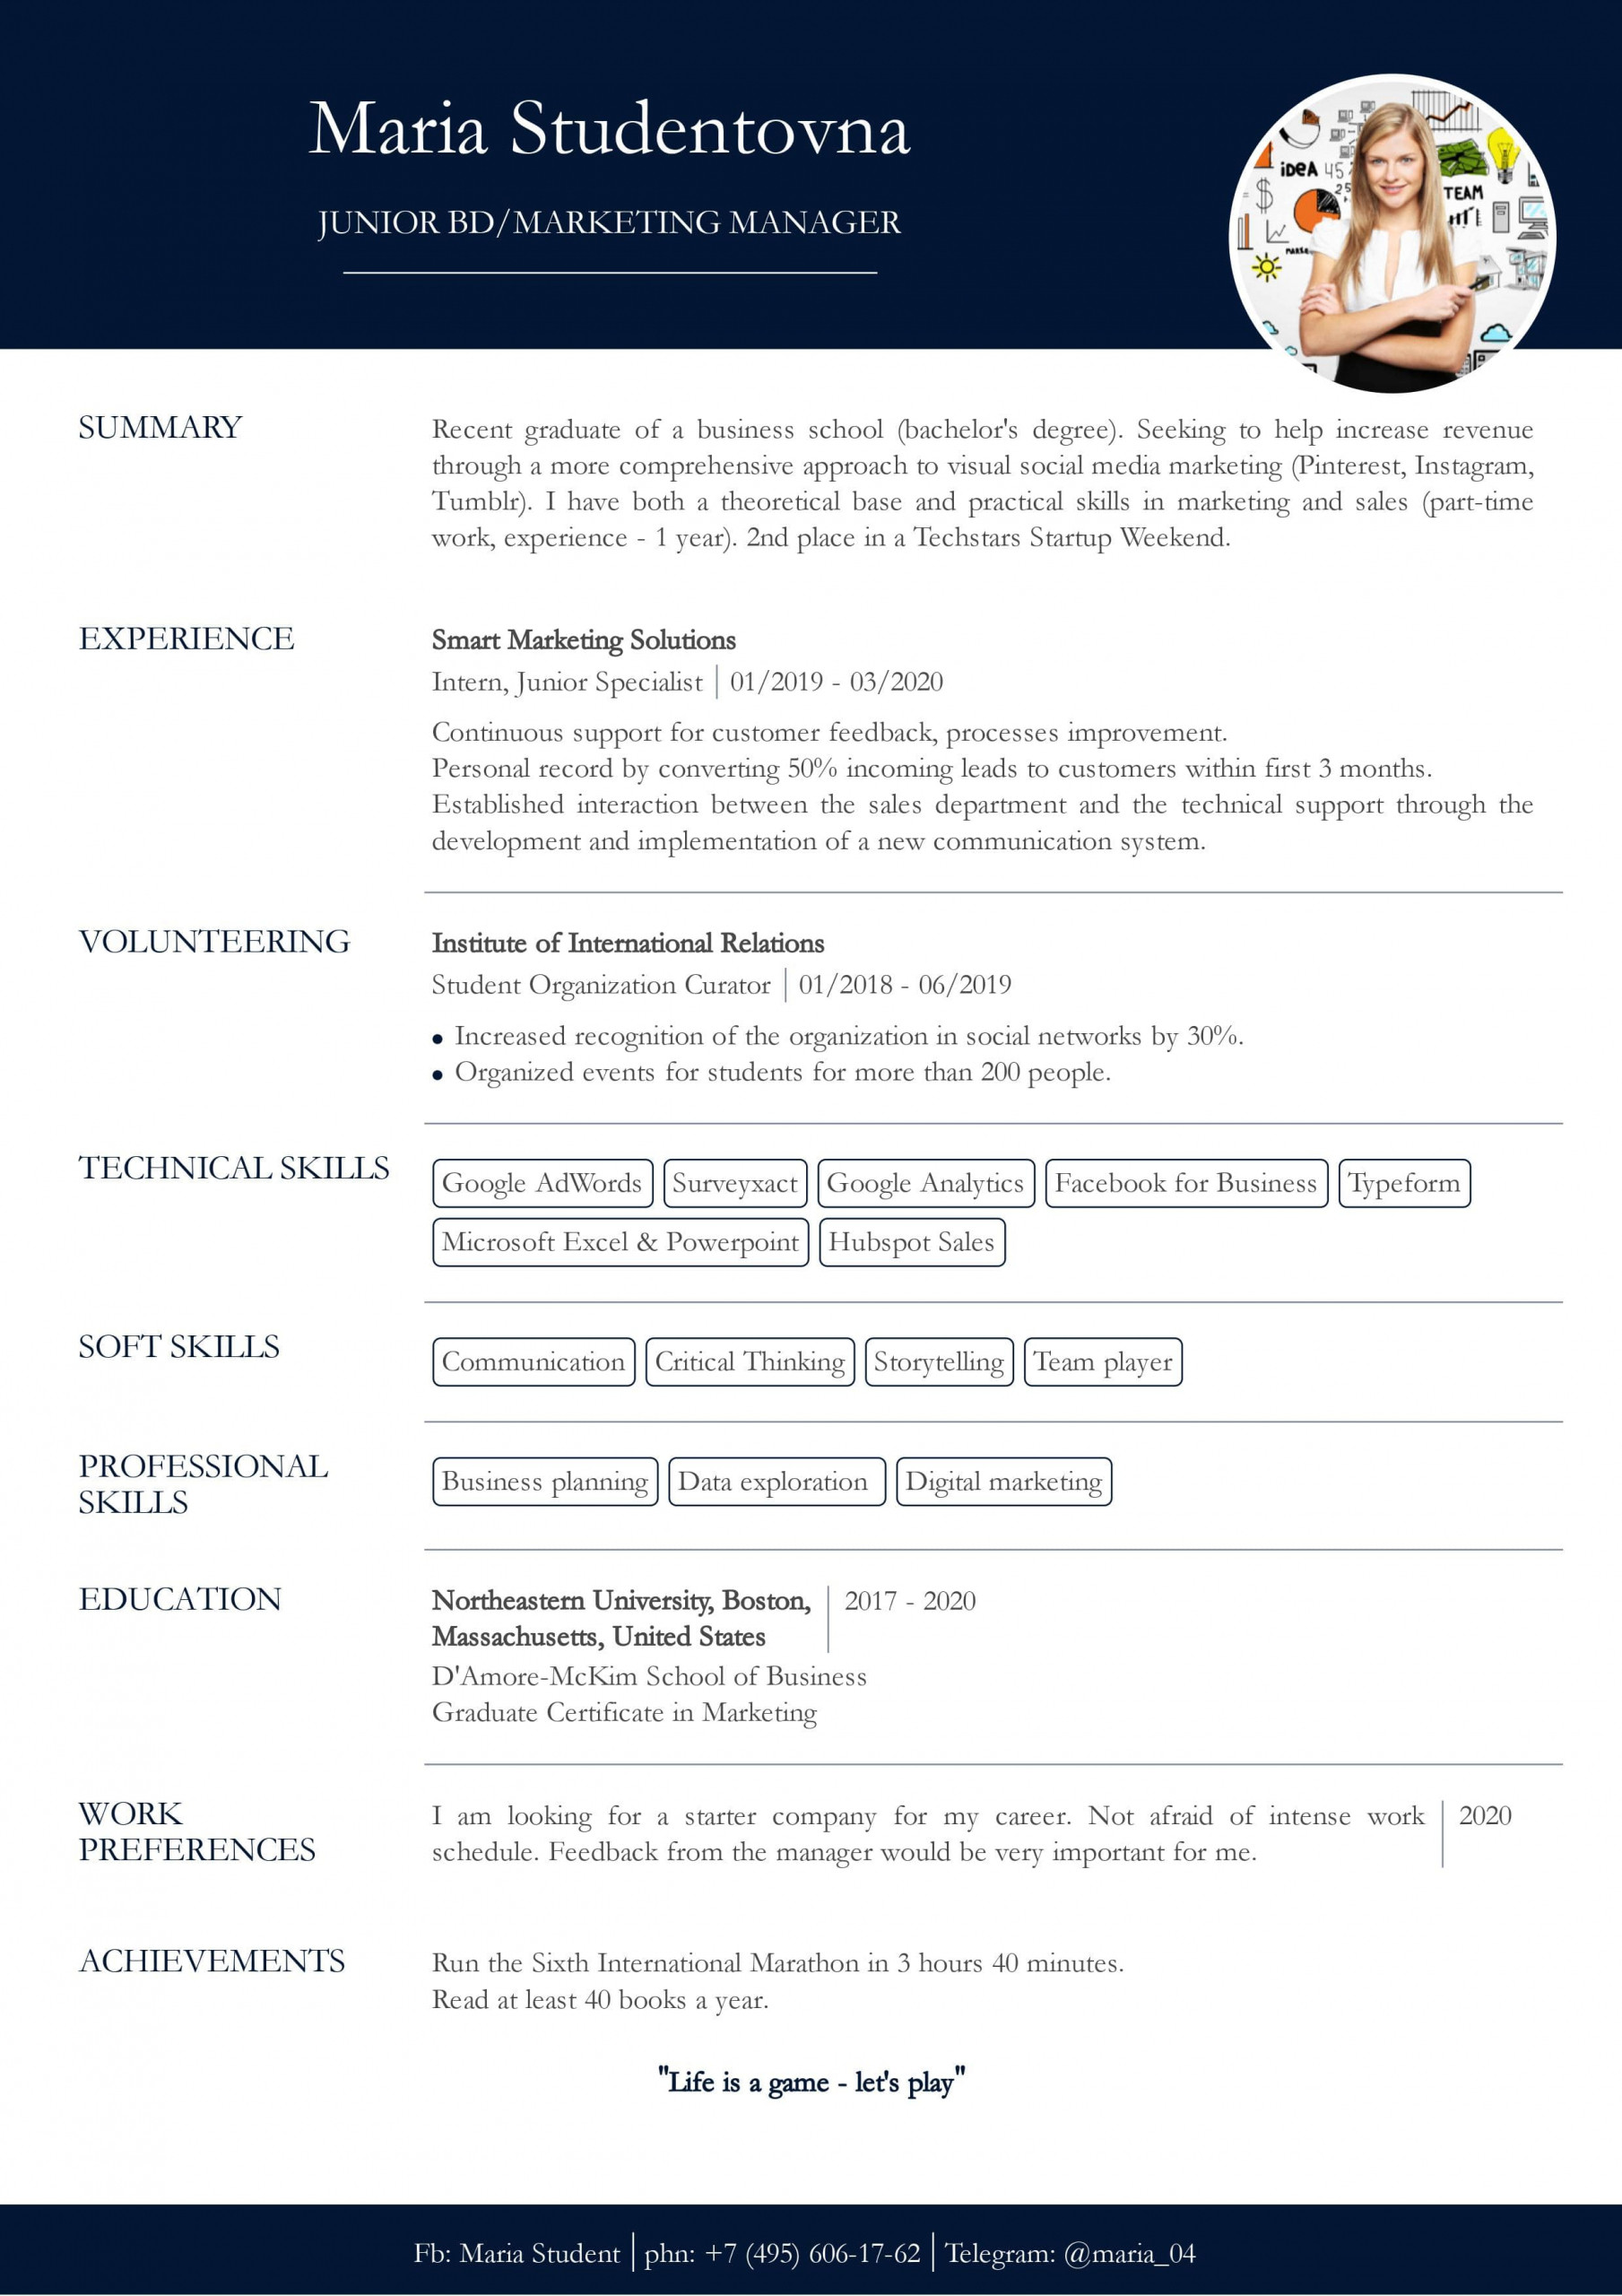 Sample Resume for Not at Of Experience Resume with No Work Experience. Sample for Students. – Cv2you Blog